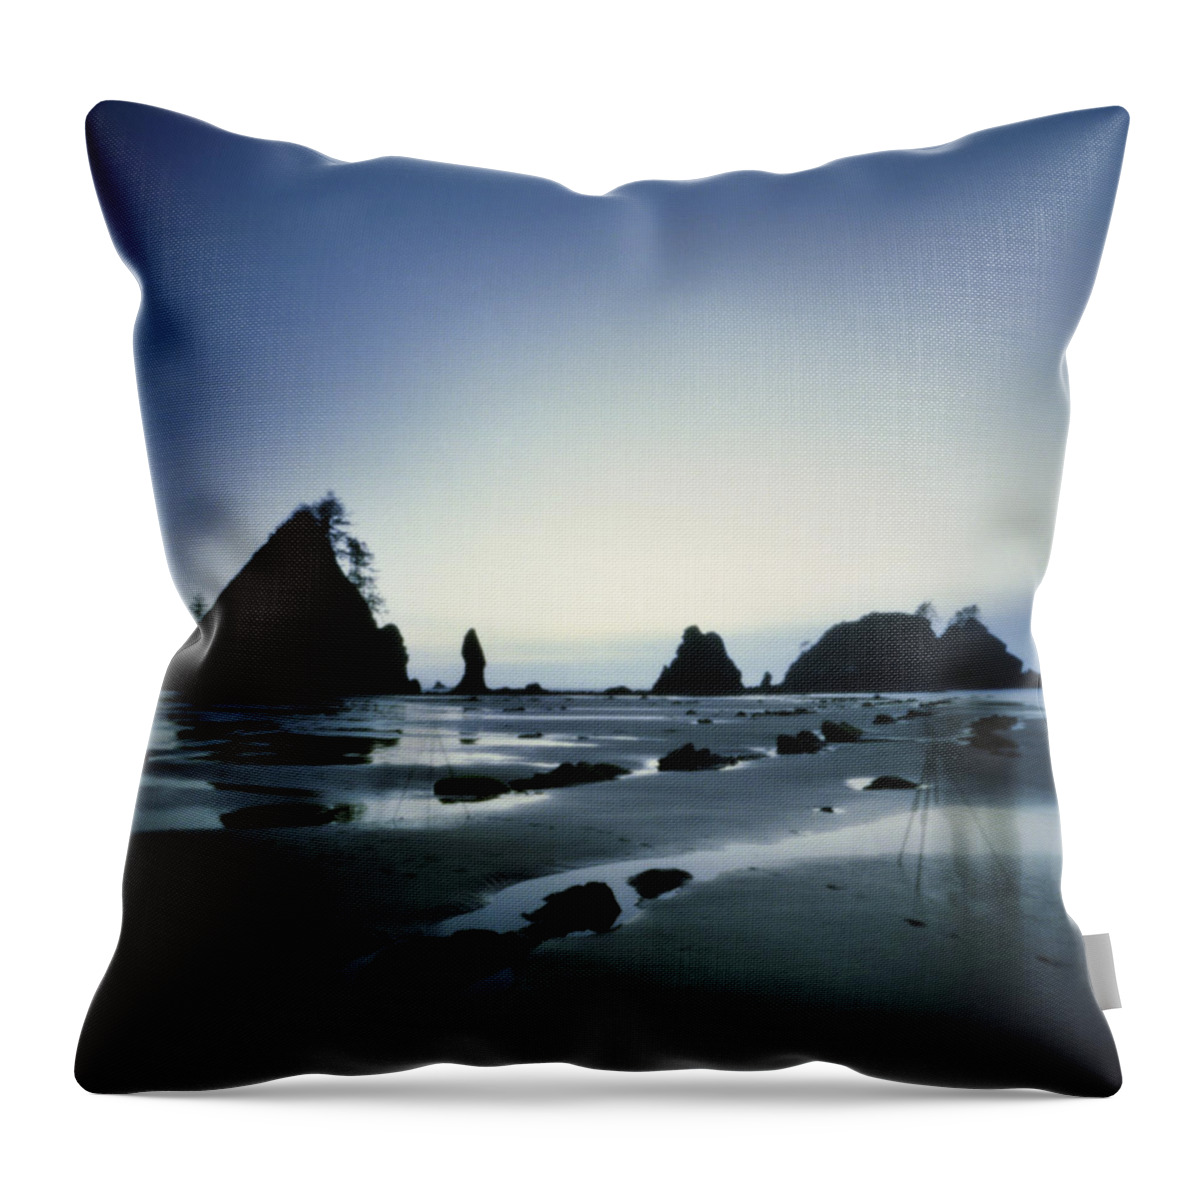 Tranquility Throw Pillow featuring the photograph Twilight Falls On Sea Stacks At Coast by Danielle D. Hughson